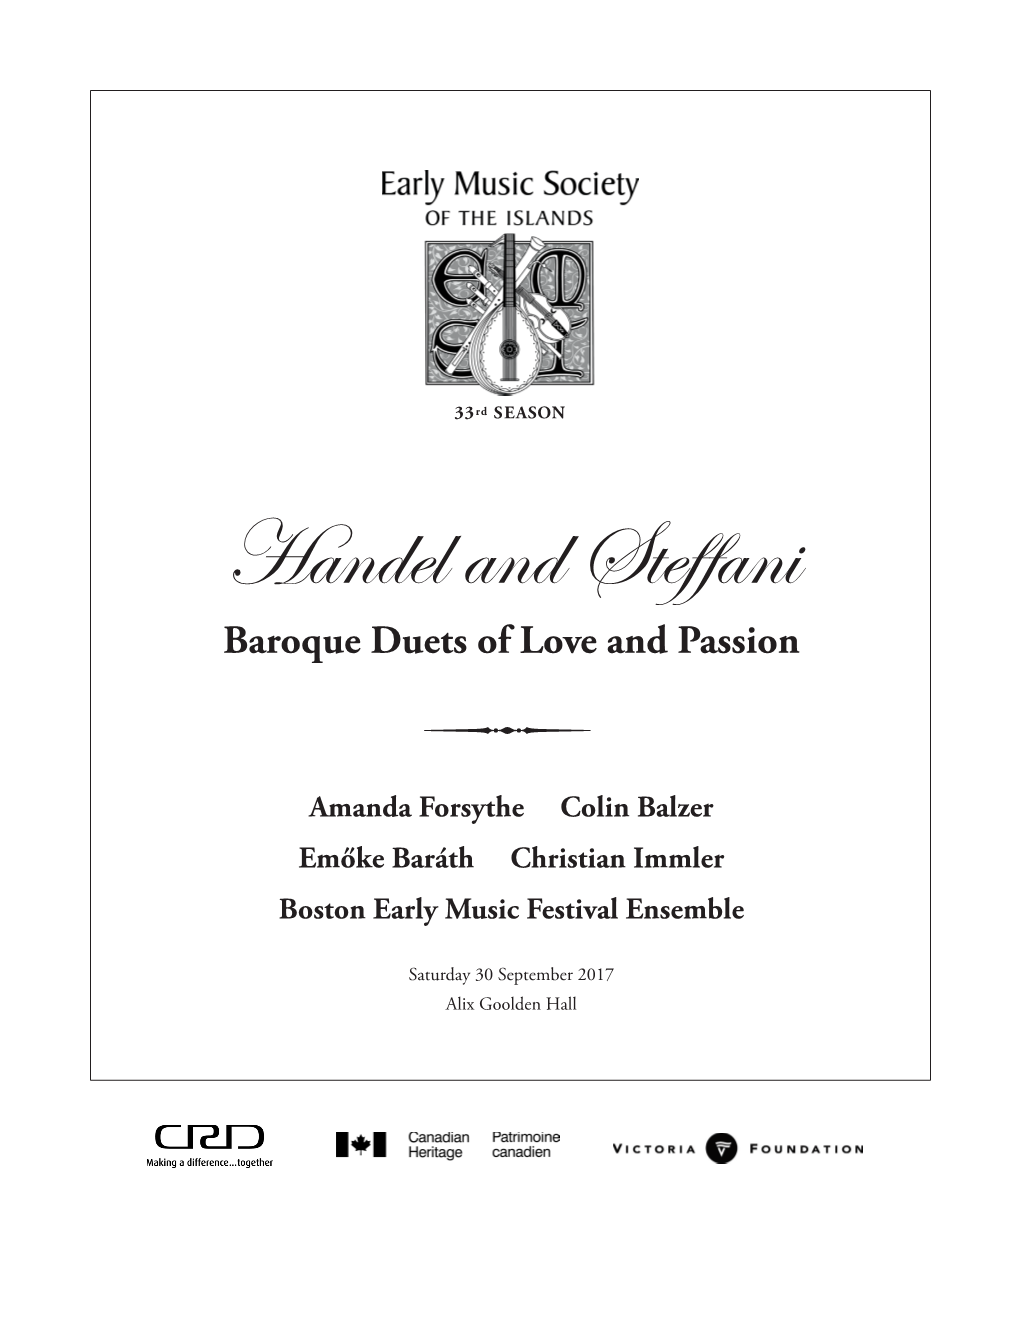 Handel and Steffani Baroque Duets of Love and Passion